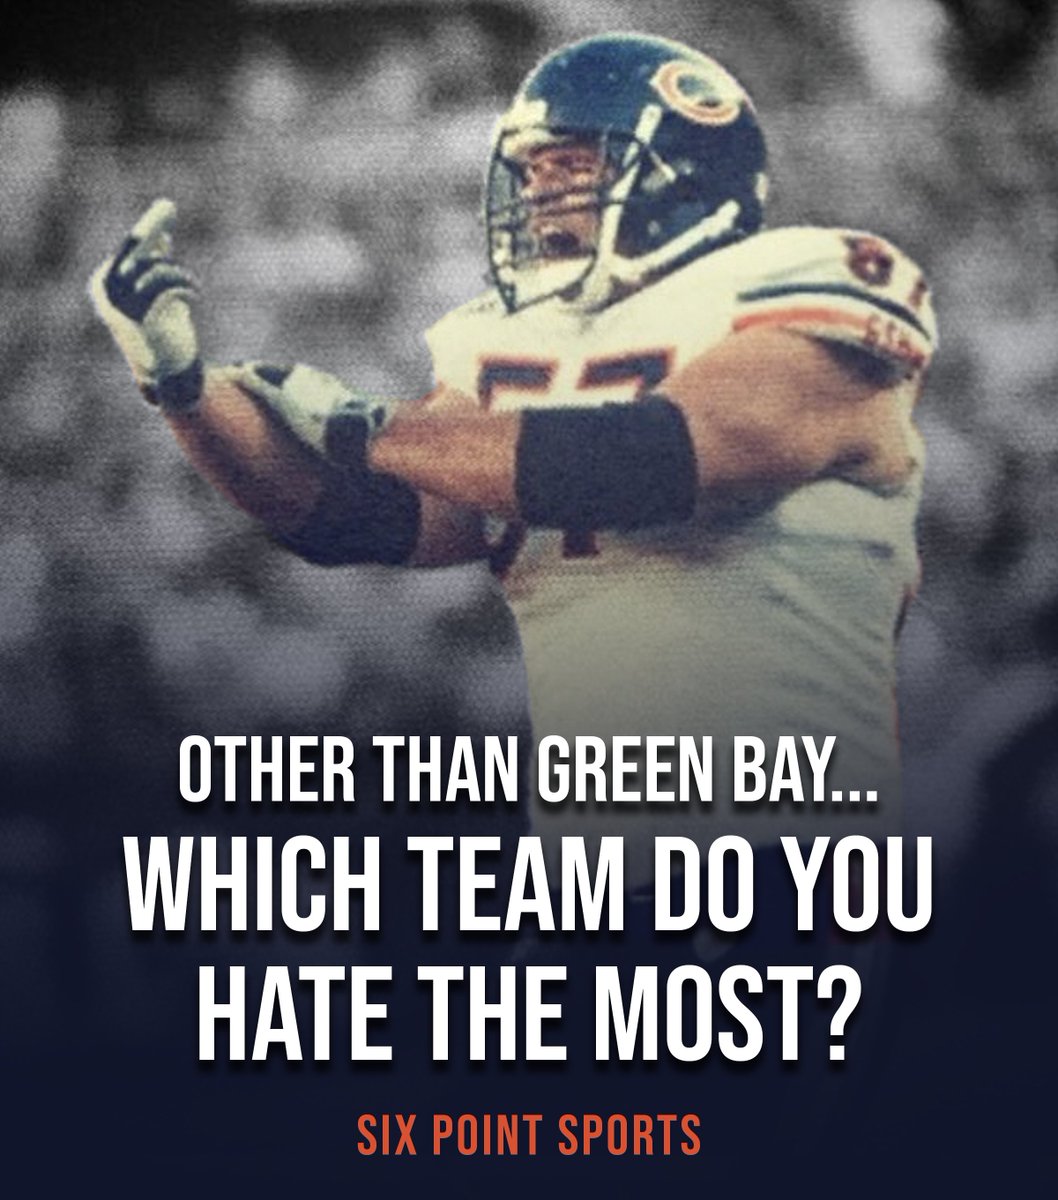 You can't say the Packers... Which team do you hate the most?